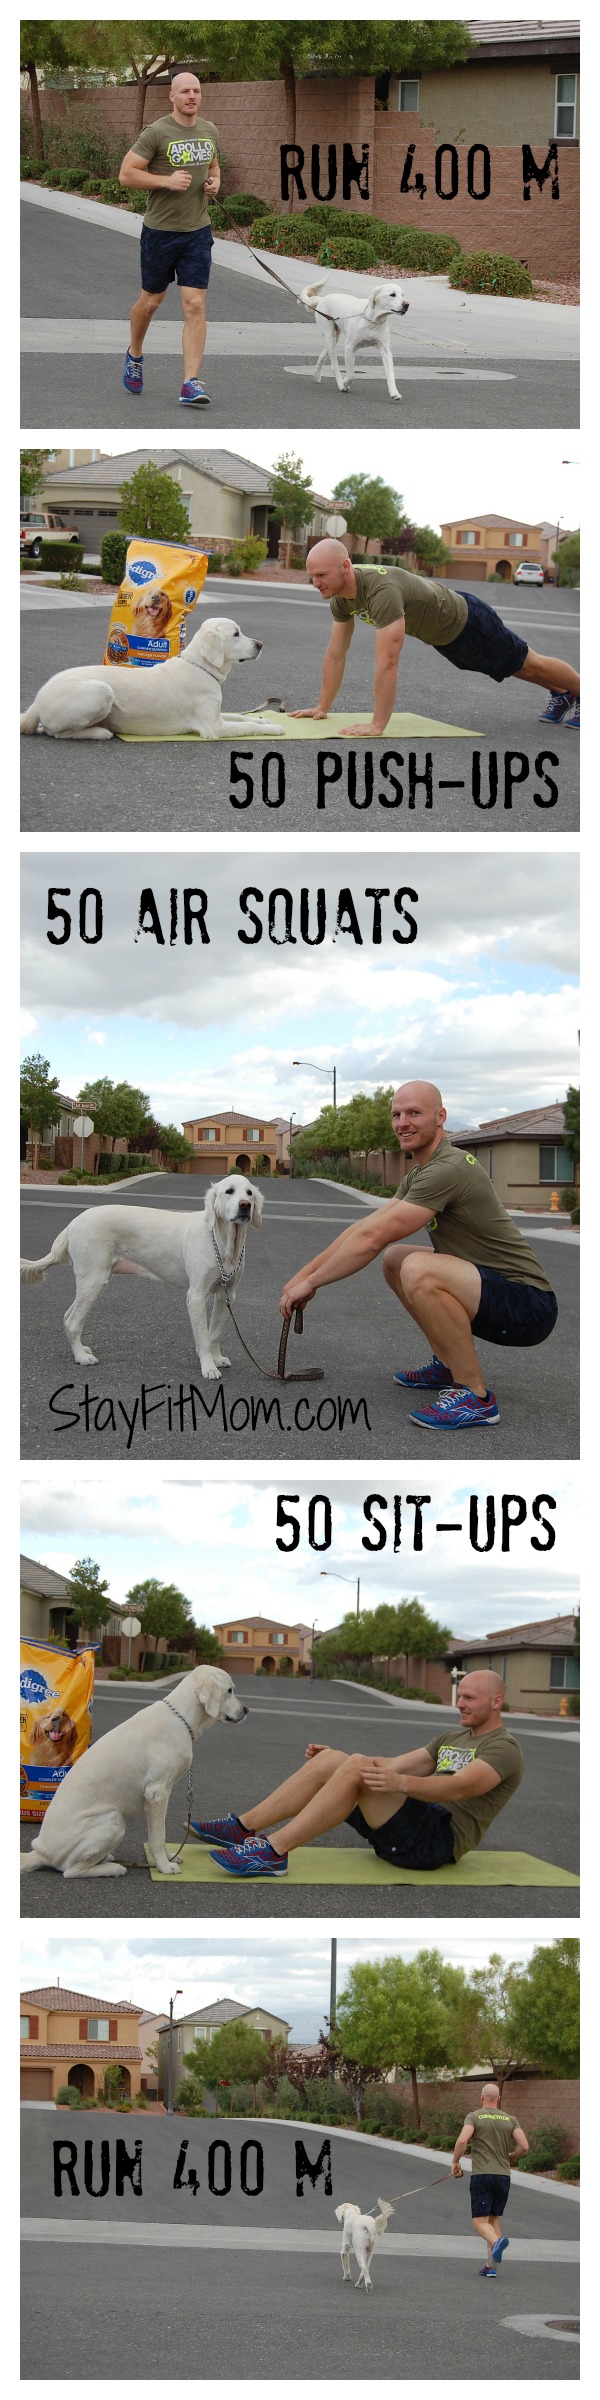 CrossFit workout with the family dog from StayFitMom.com!